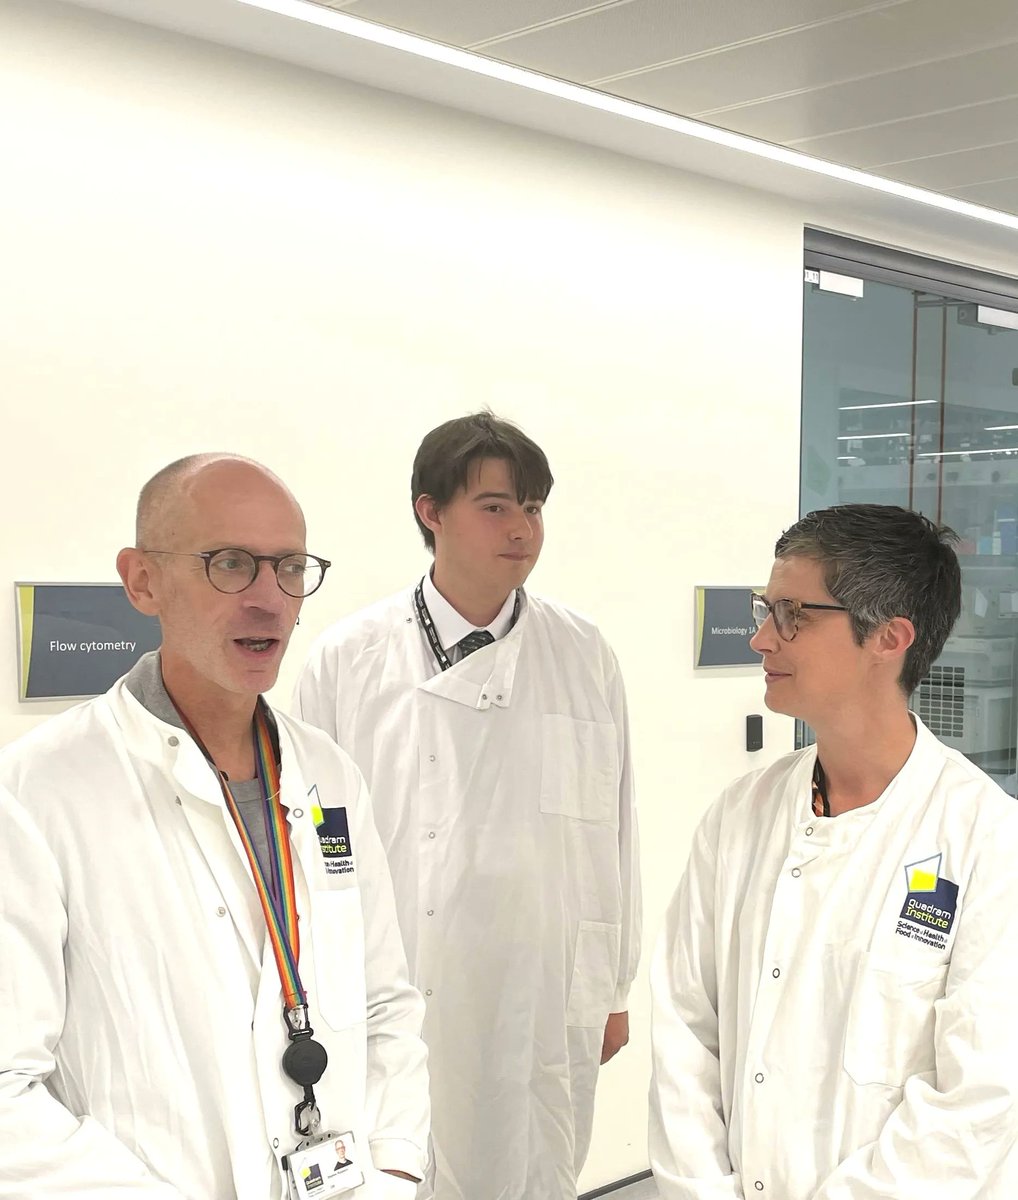 We were delighted to welcome @NorwichChloe MP to meet Dr Stephen Robinson's group today. The Robinson group researches breast cancer and gut microbiome, with funding from @bigctweets and @BreastCancerNow. Read more ➡️ buff.ly/3ReSLFJ